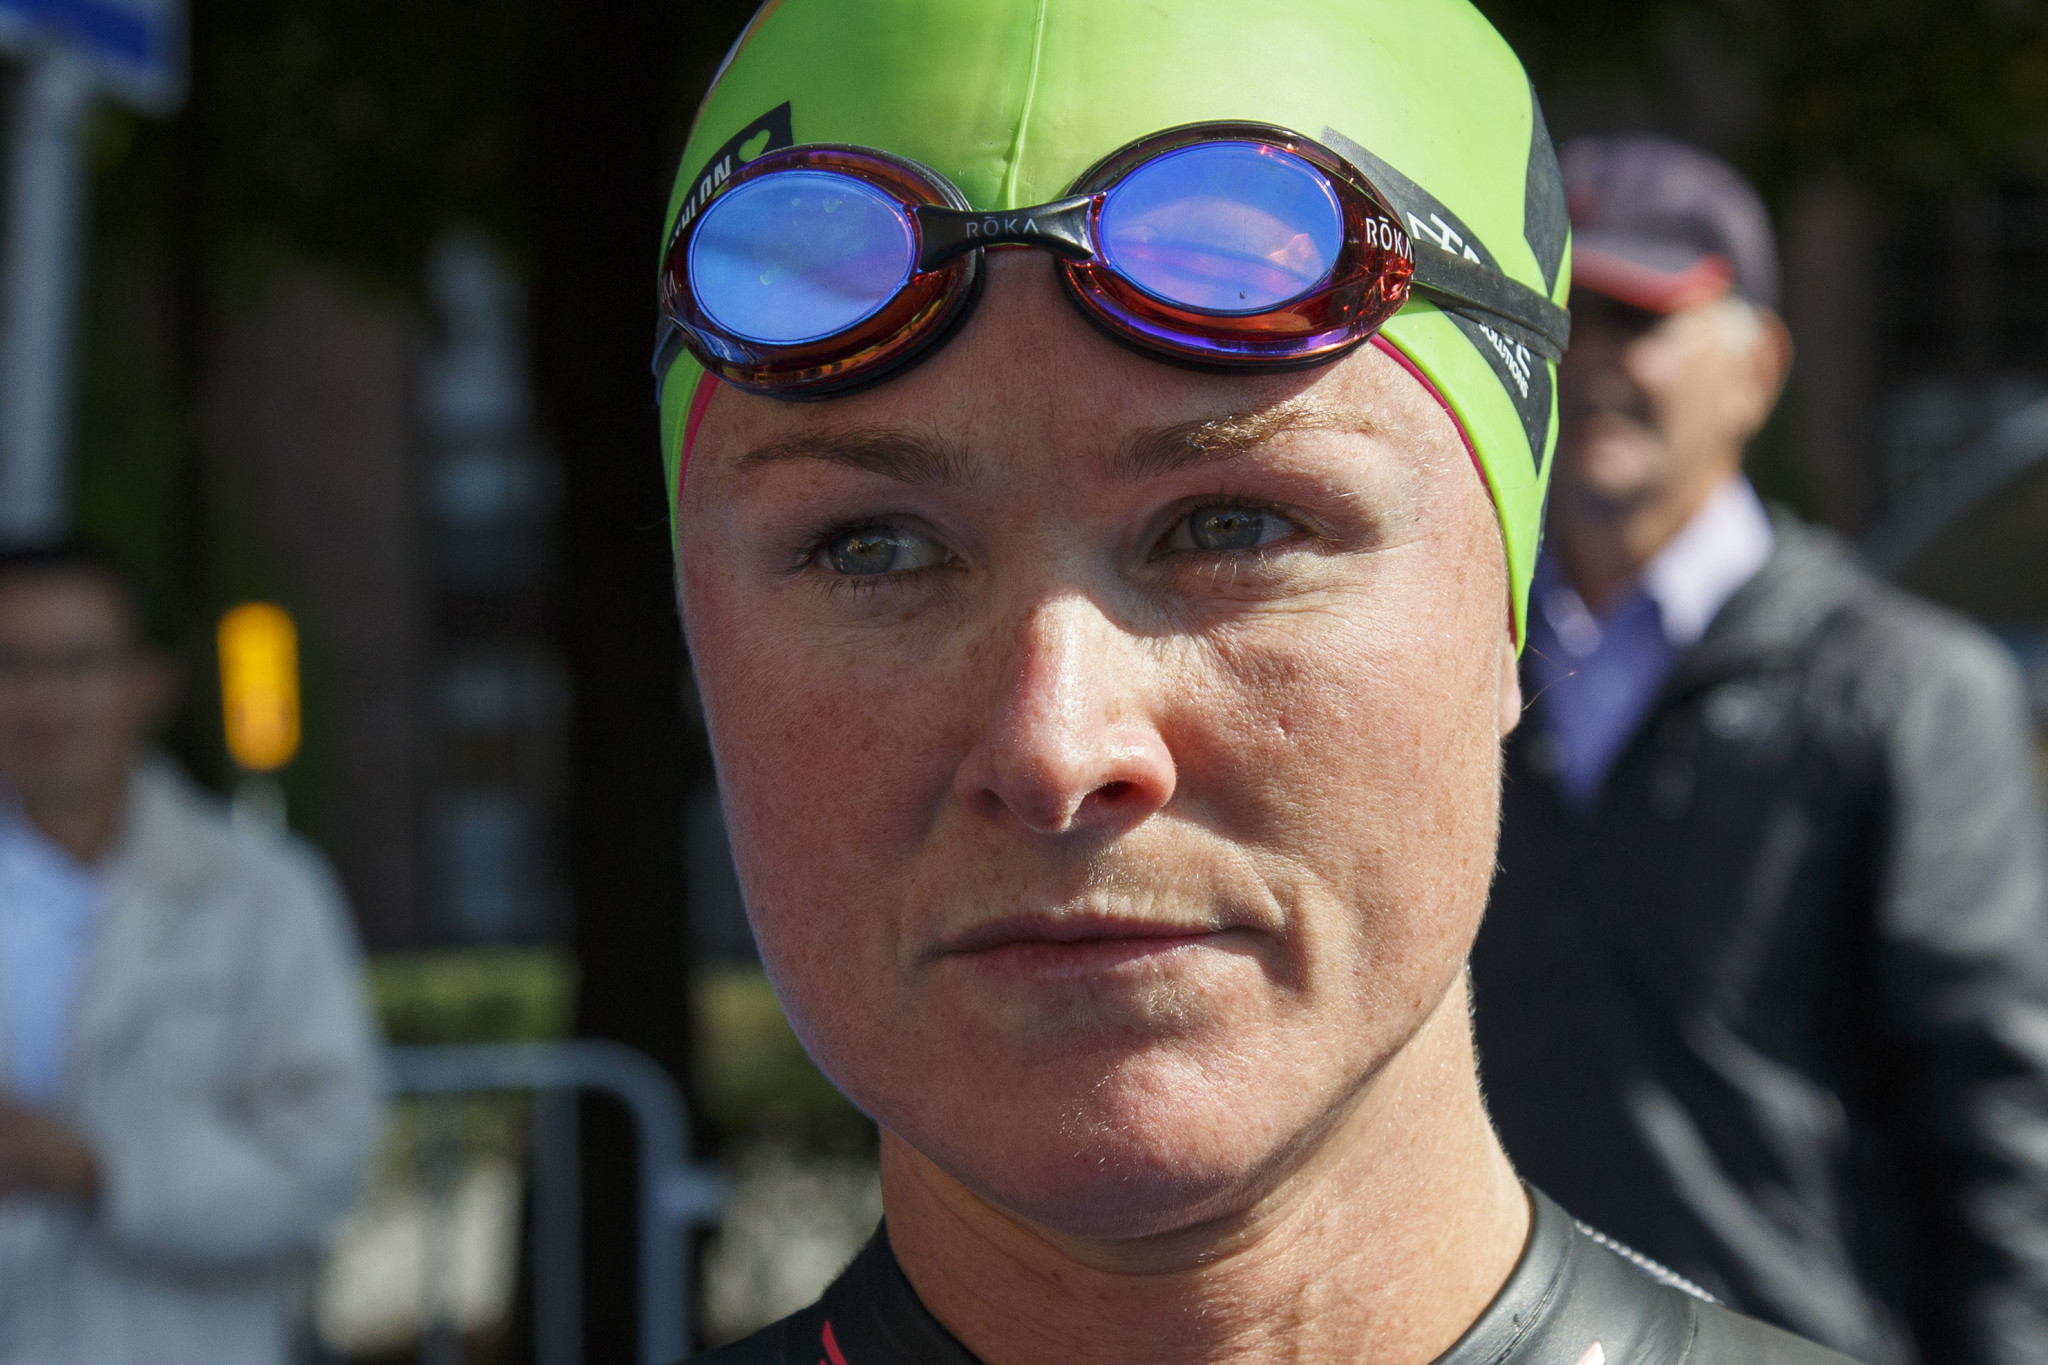 Duffy poised to retain world triathlon title in Rotterdam – but Mola faces Gomez challenge